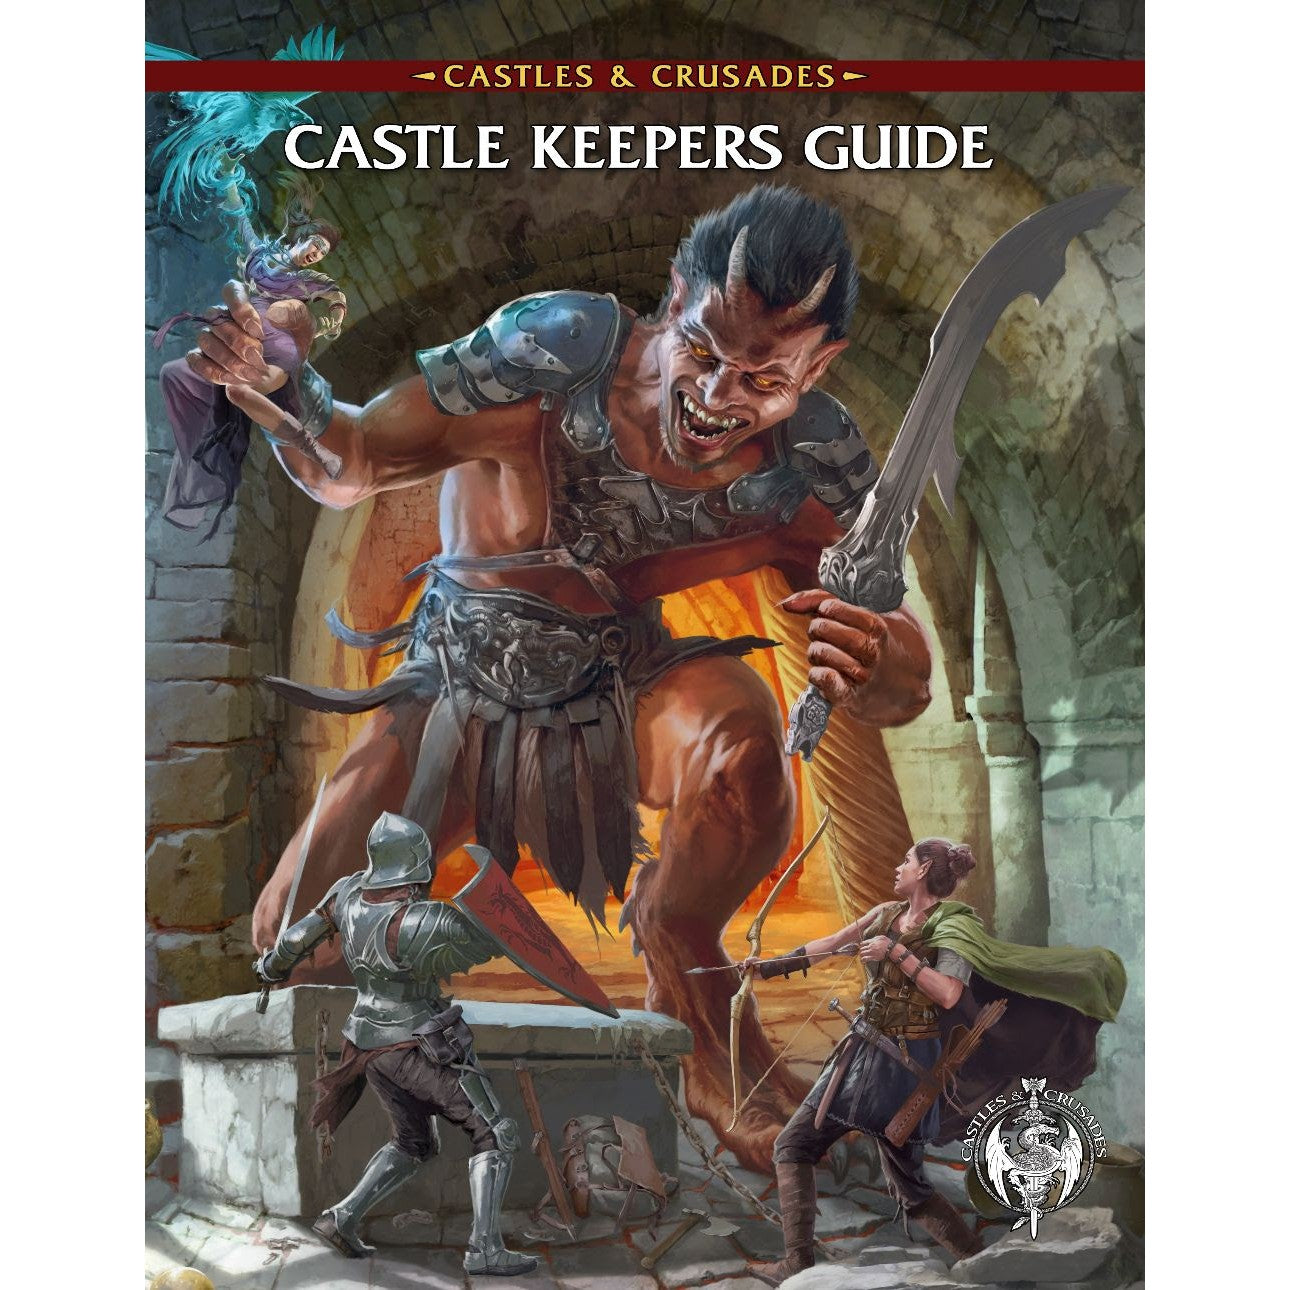 Castles & Crusades - Castle Keepers Guide 4th Printing